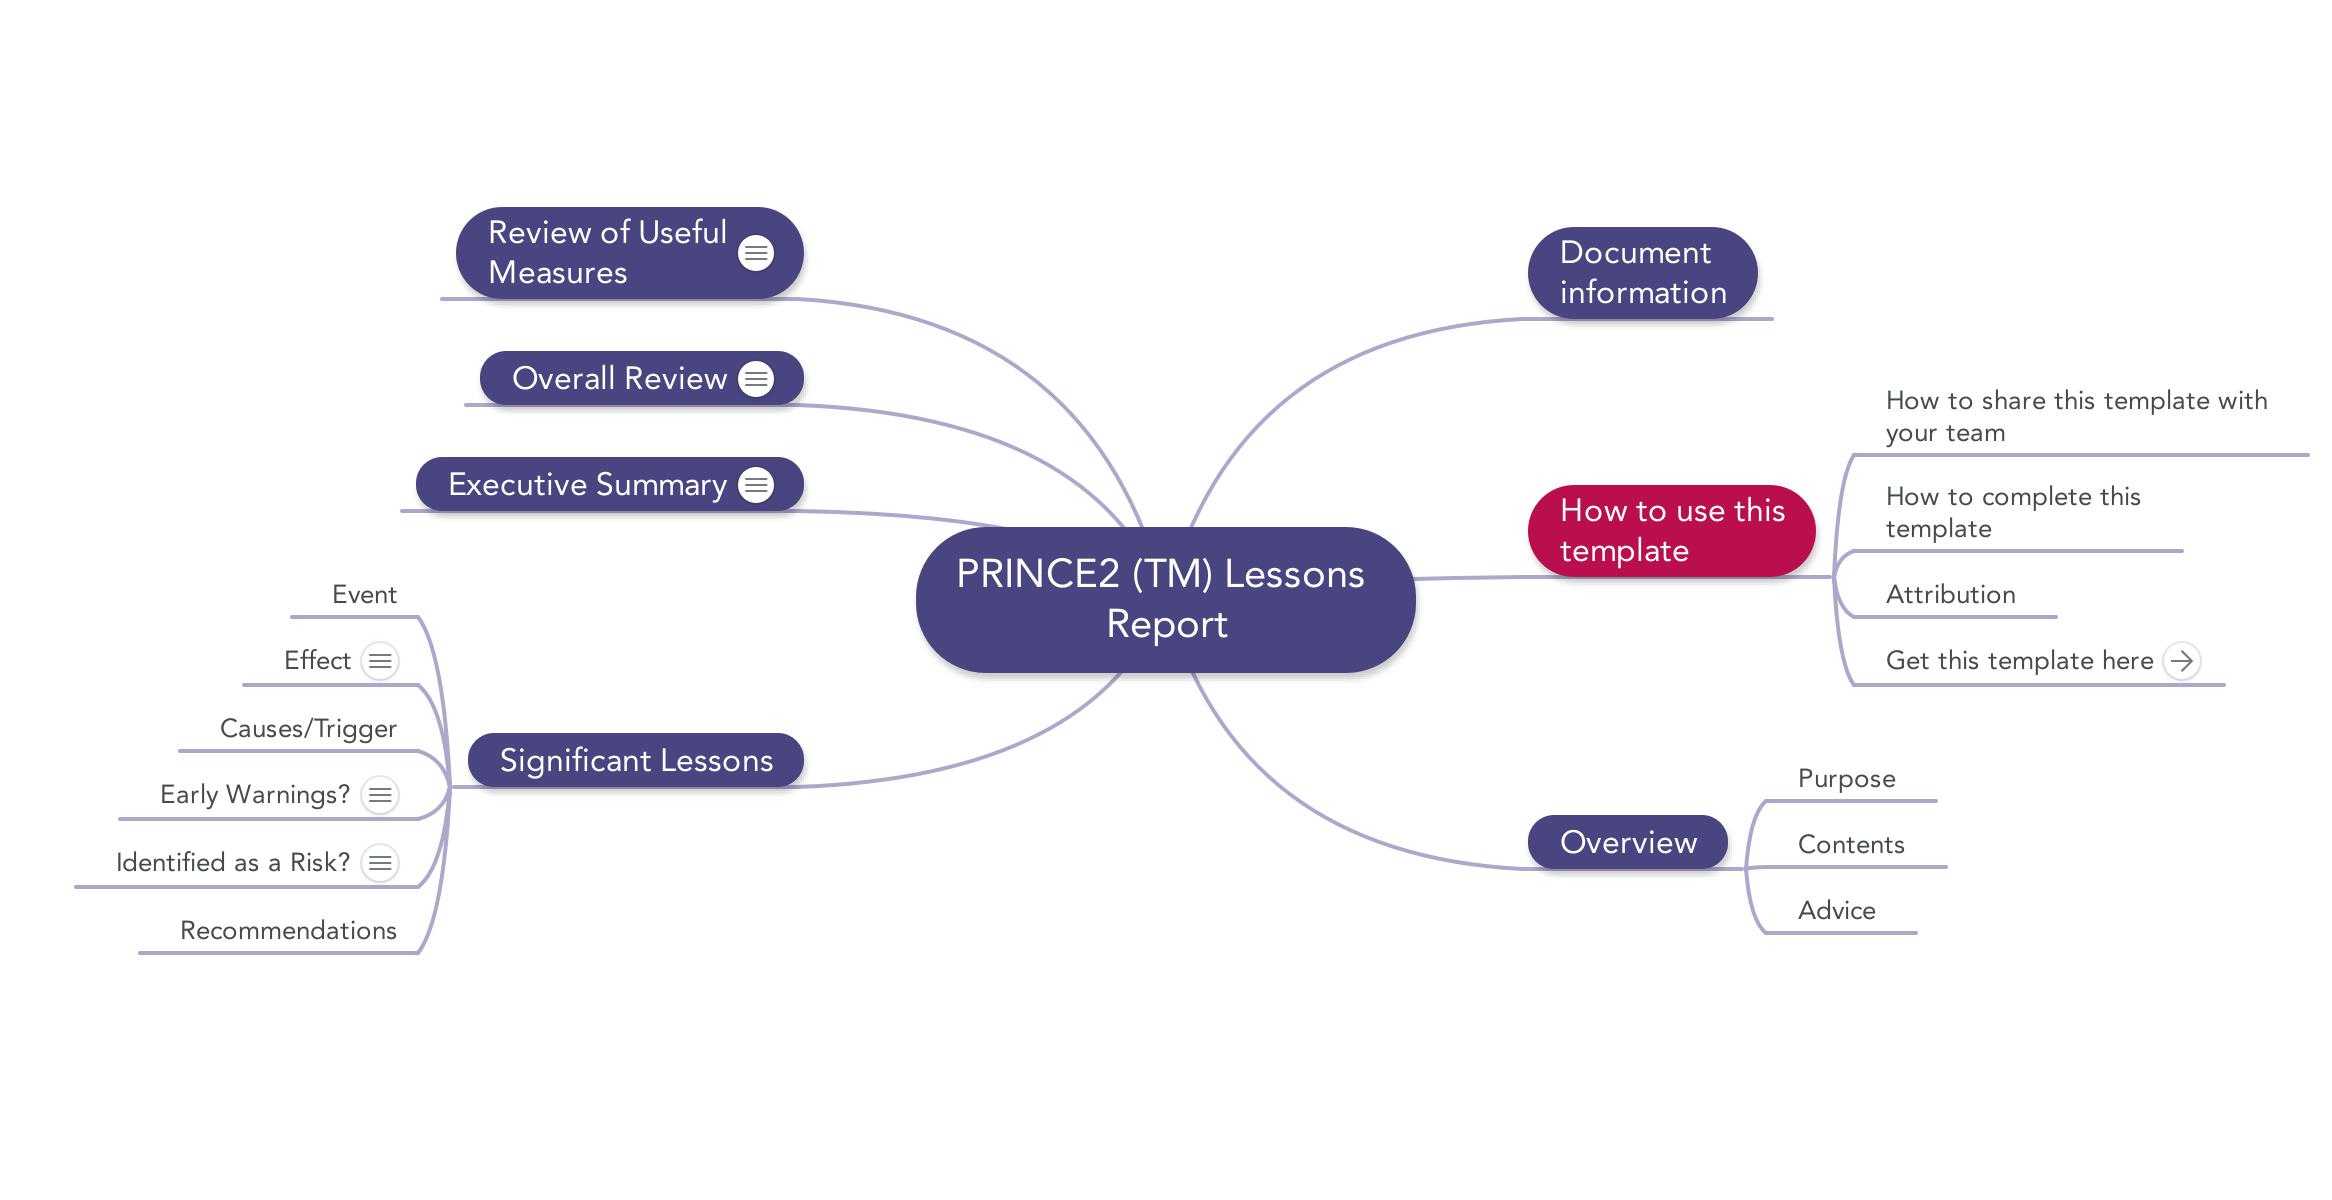 Prince2 Lessons Report | Download Template For Prince2 Lessons Learned Report Template